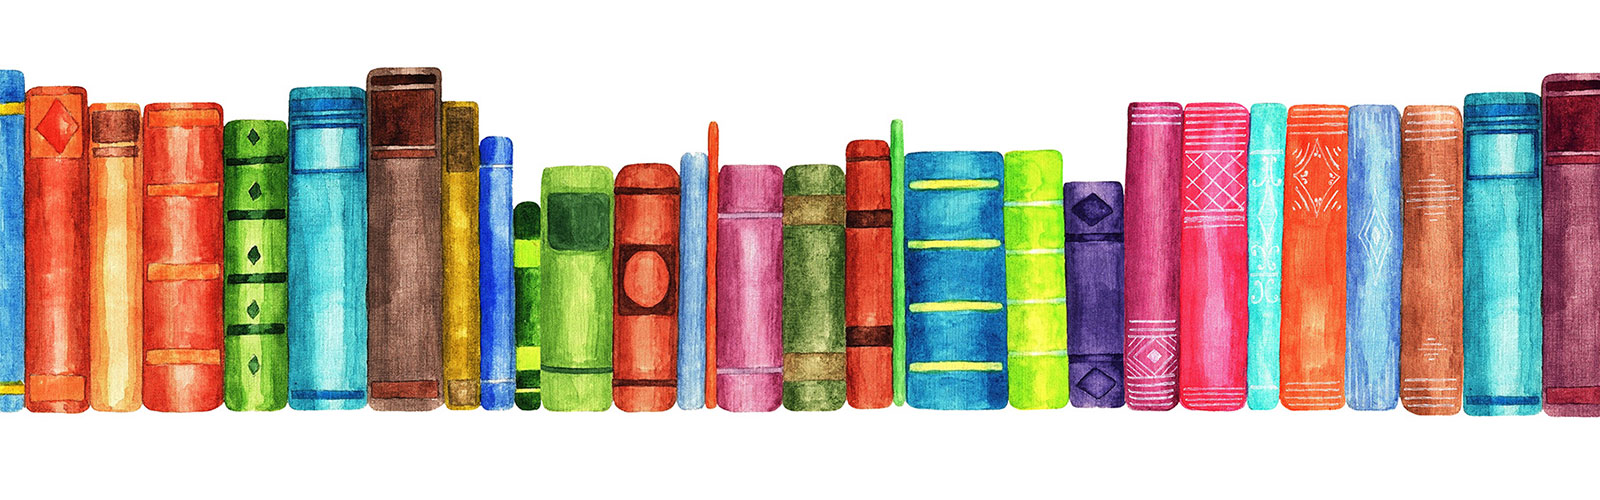 A drawing of a row of colorful books